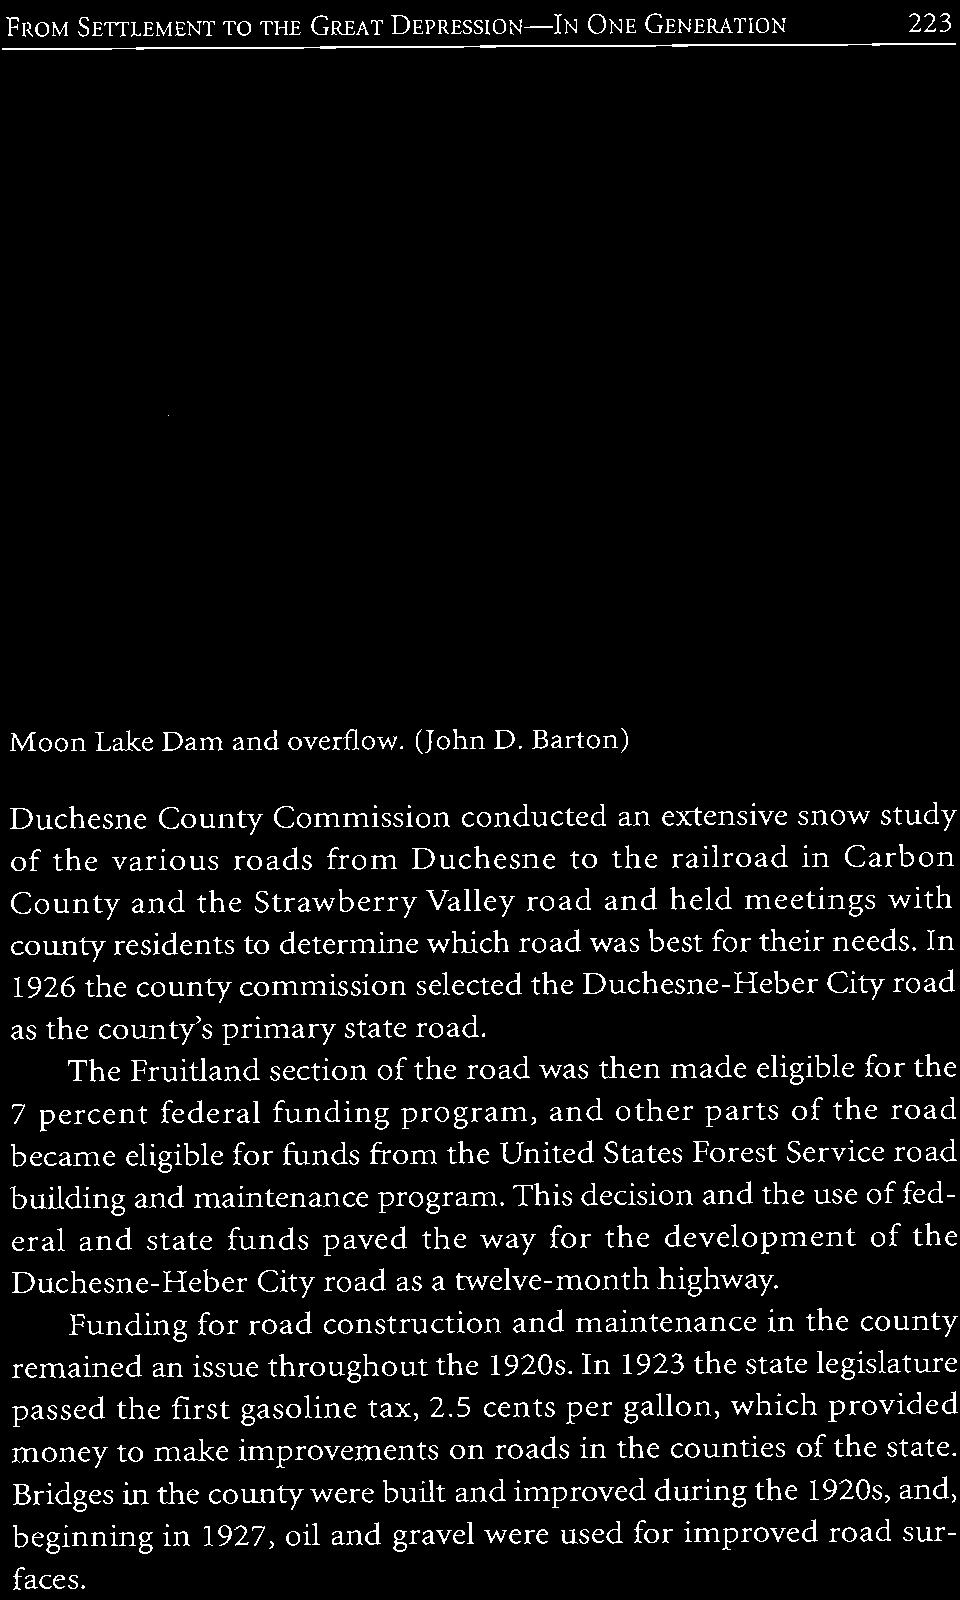 residents to determine which road was best for their needs. In 1926 the county commission selected the Duchesne-Heber City road as the county's primary state road.